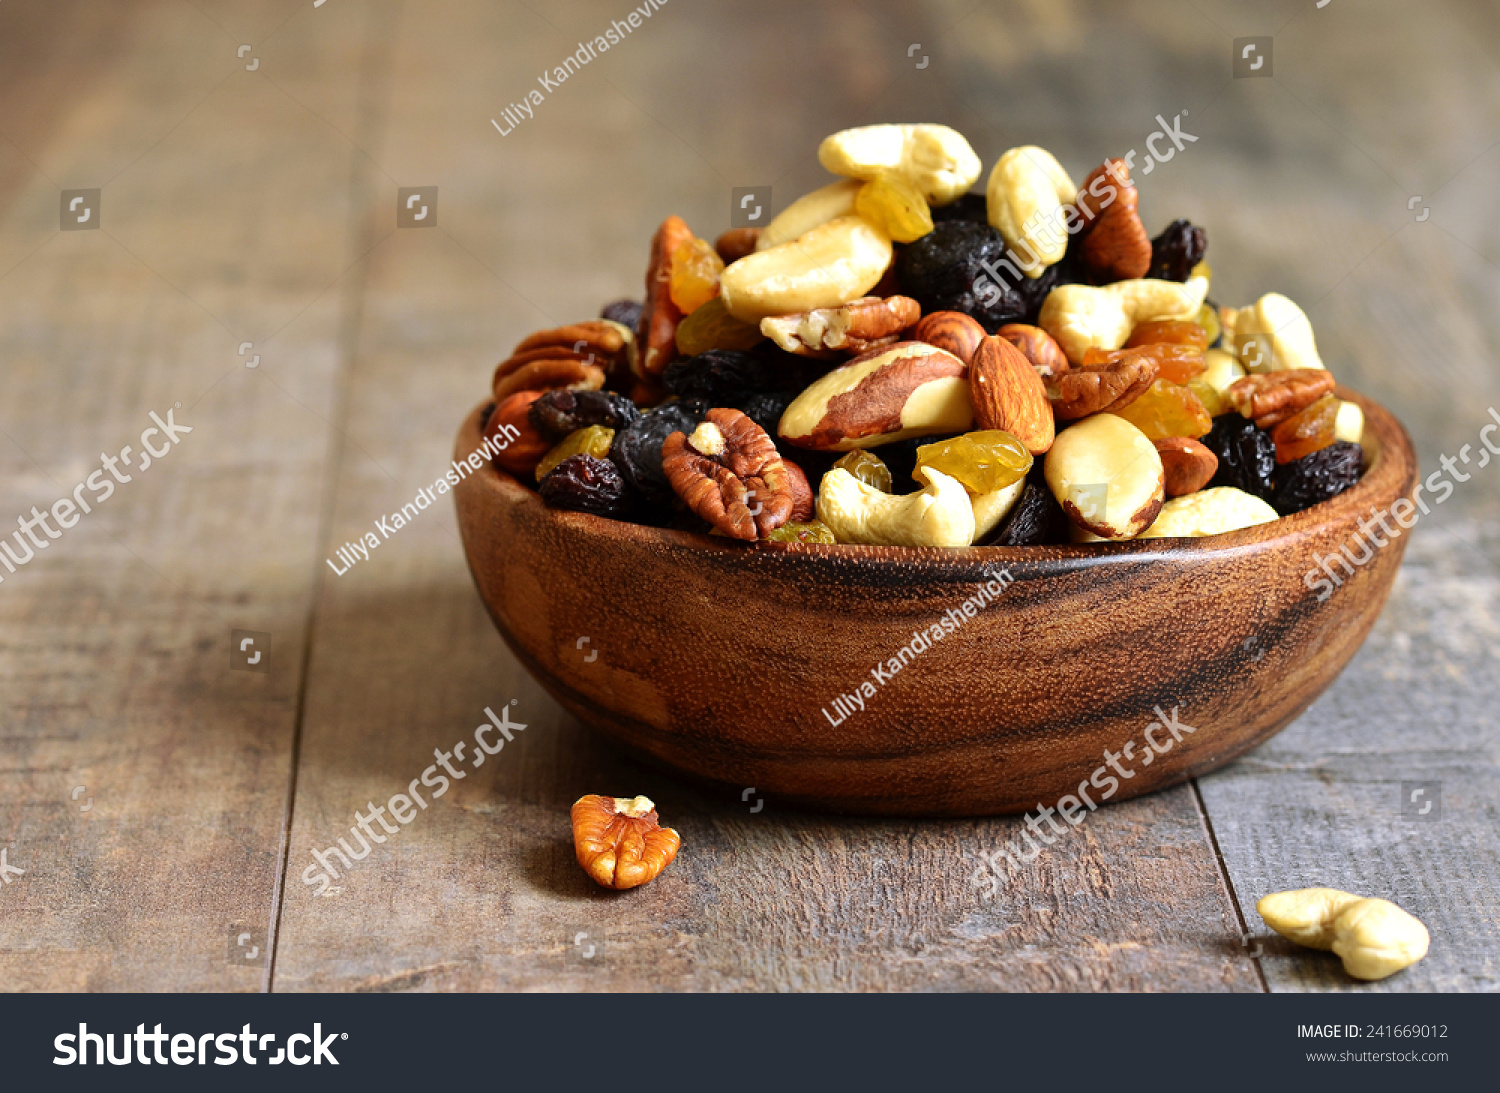 Dried fruits and nuts mix in a wooden bowl. #241669012